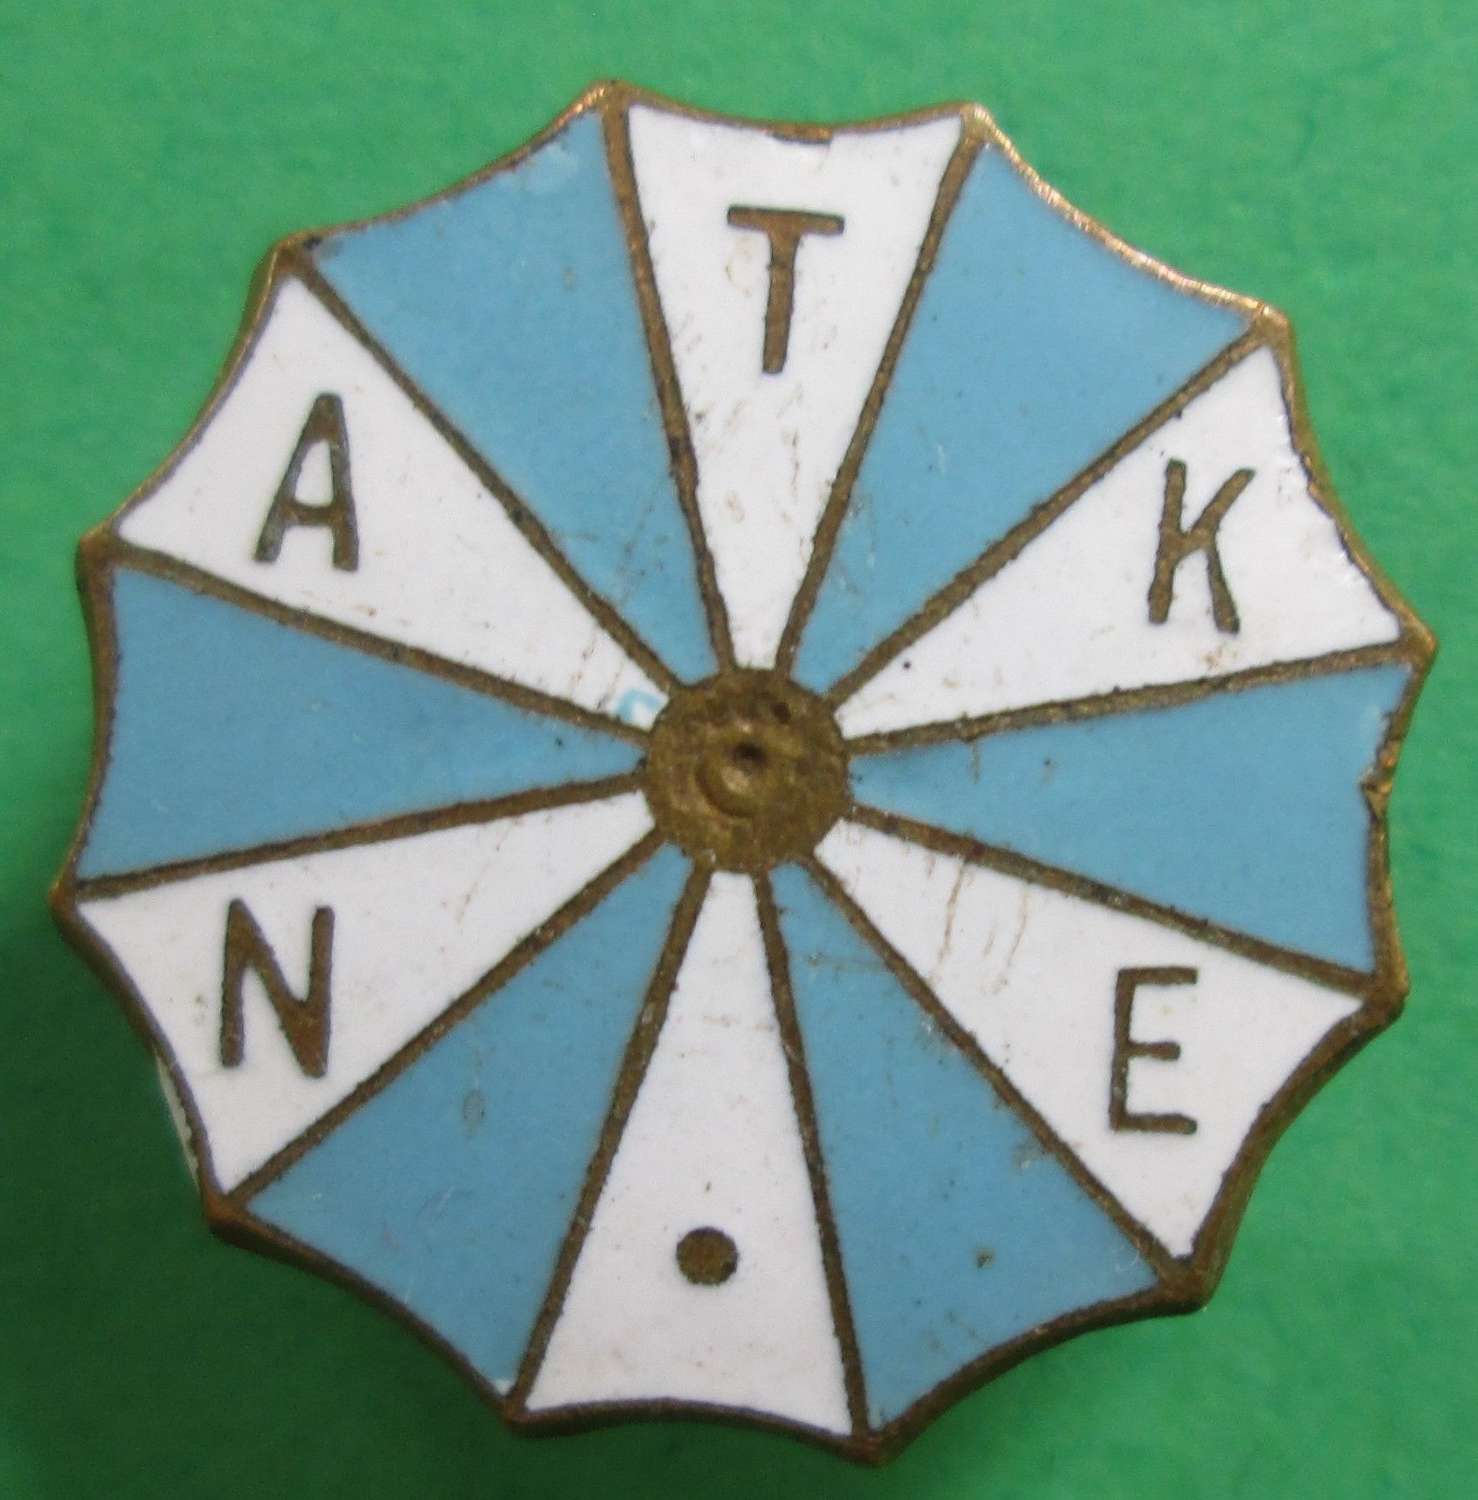 A NATIONAL ASSOCIATION OF THEATRICAL AND KINE EMPLOYEES BADGE